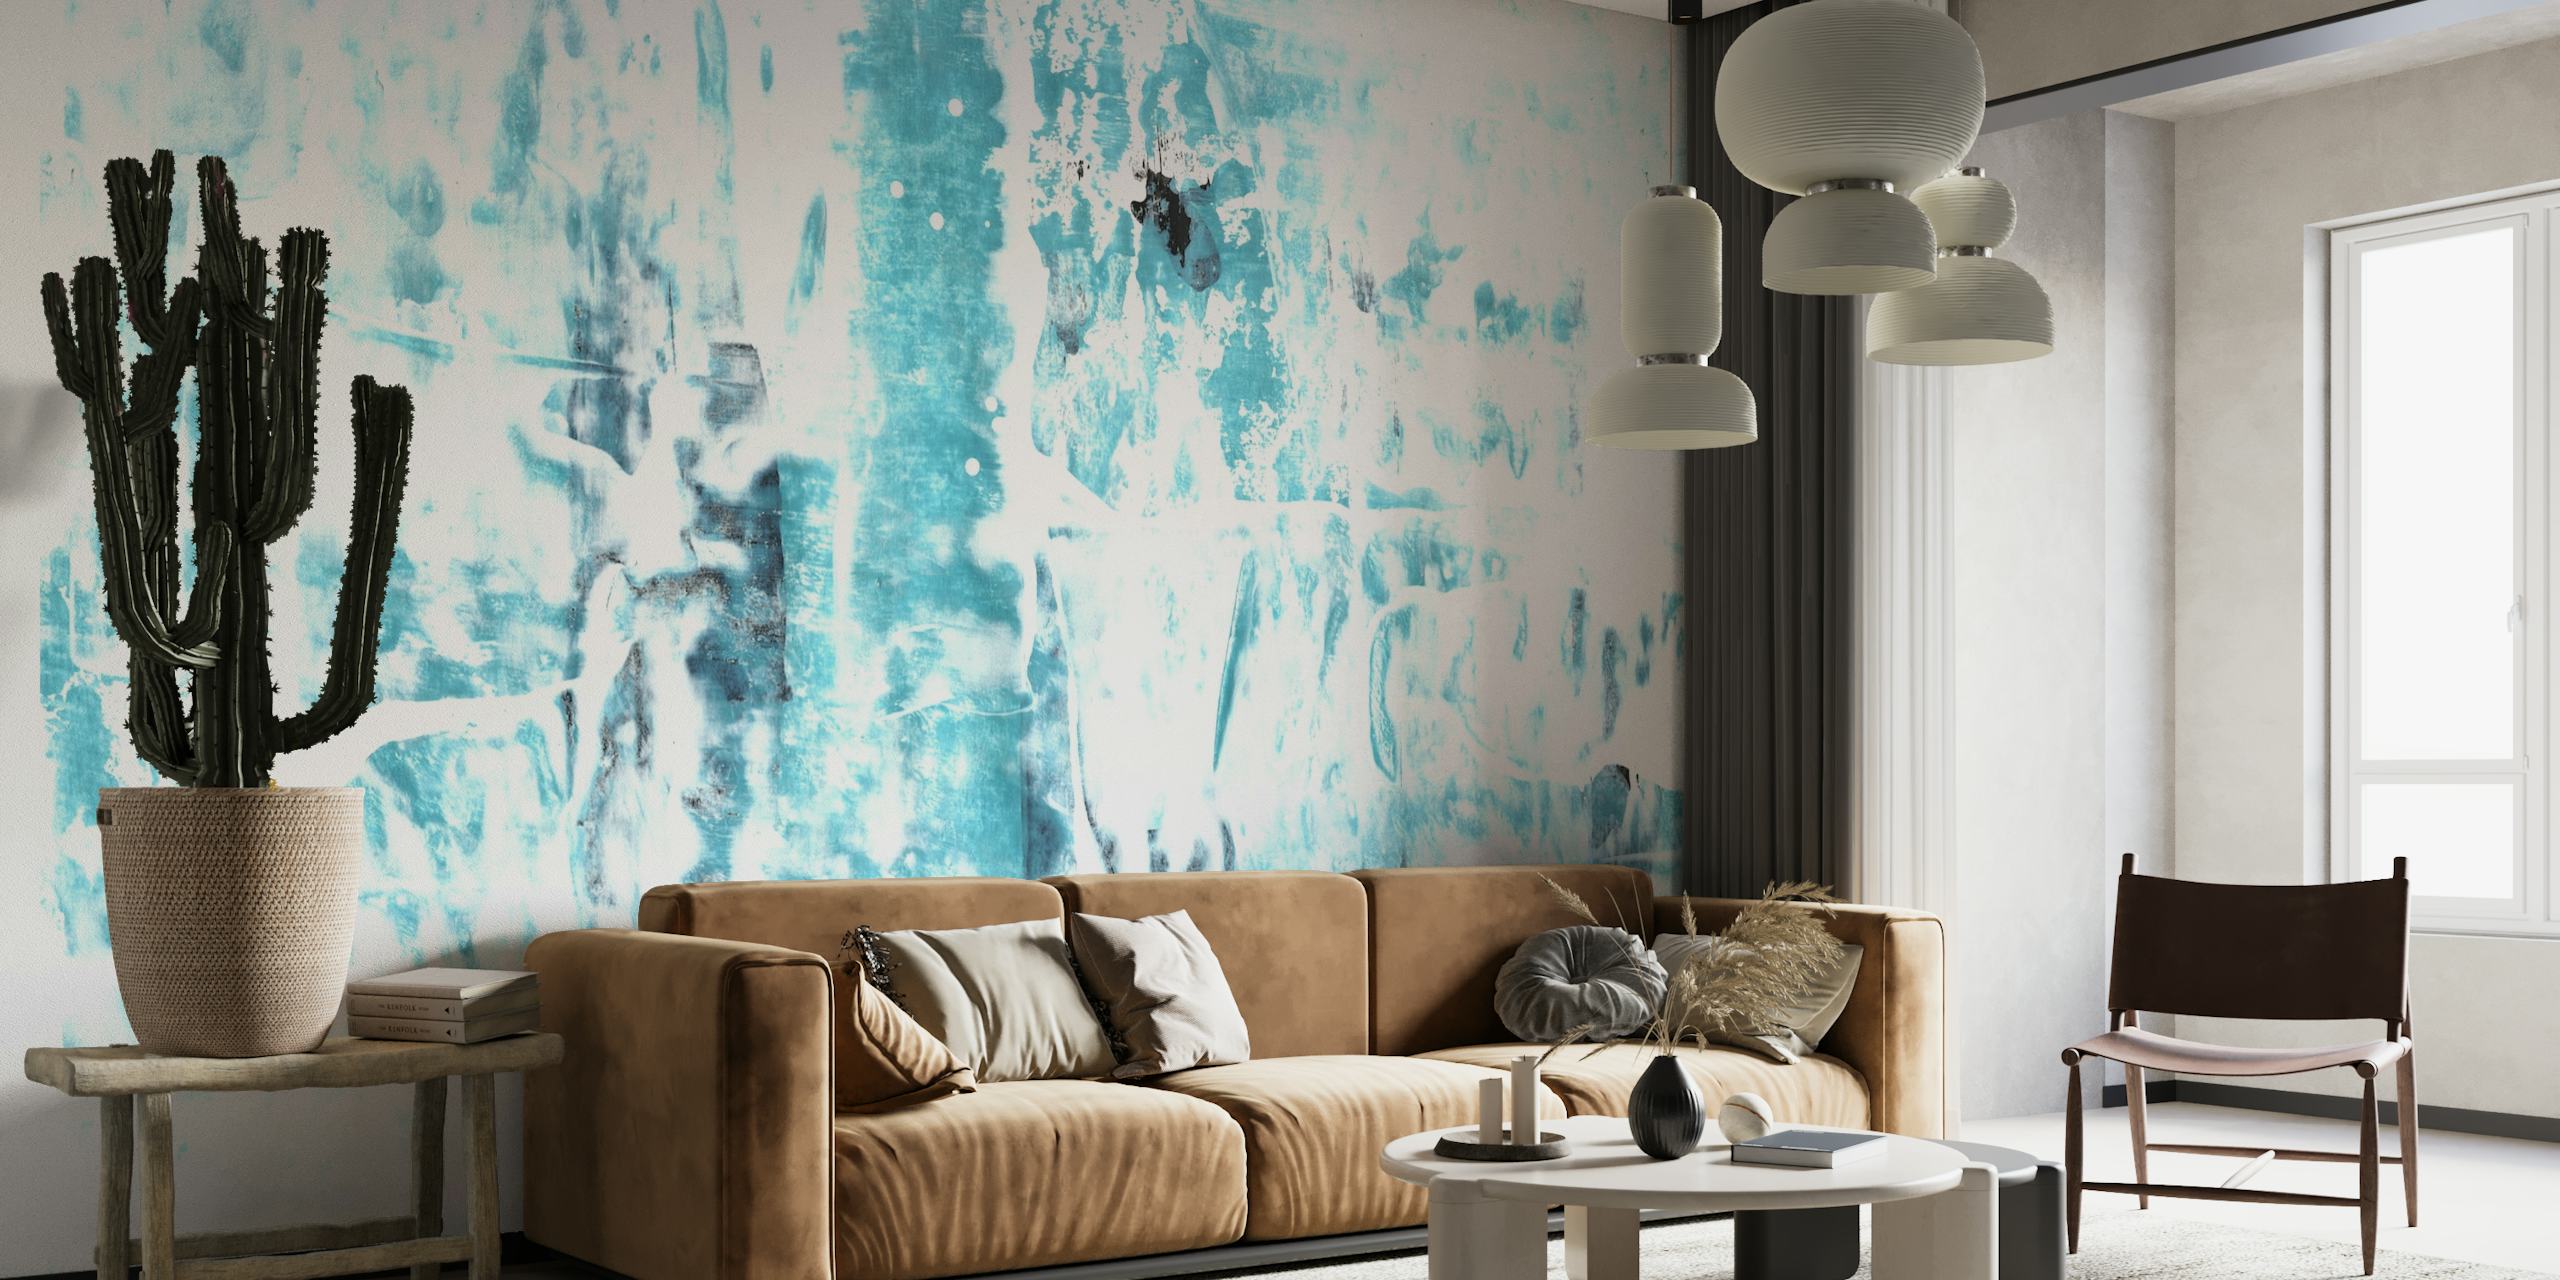 Teal and white abstract concrete texture wall mural